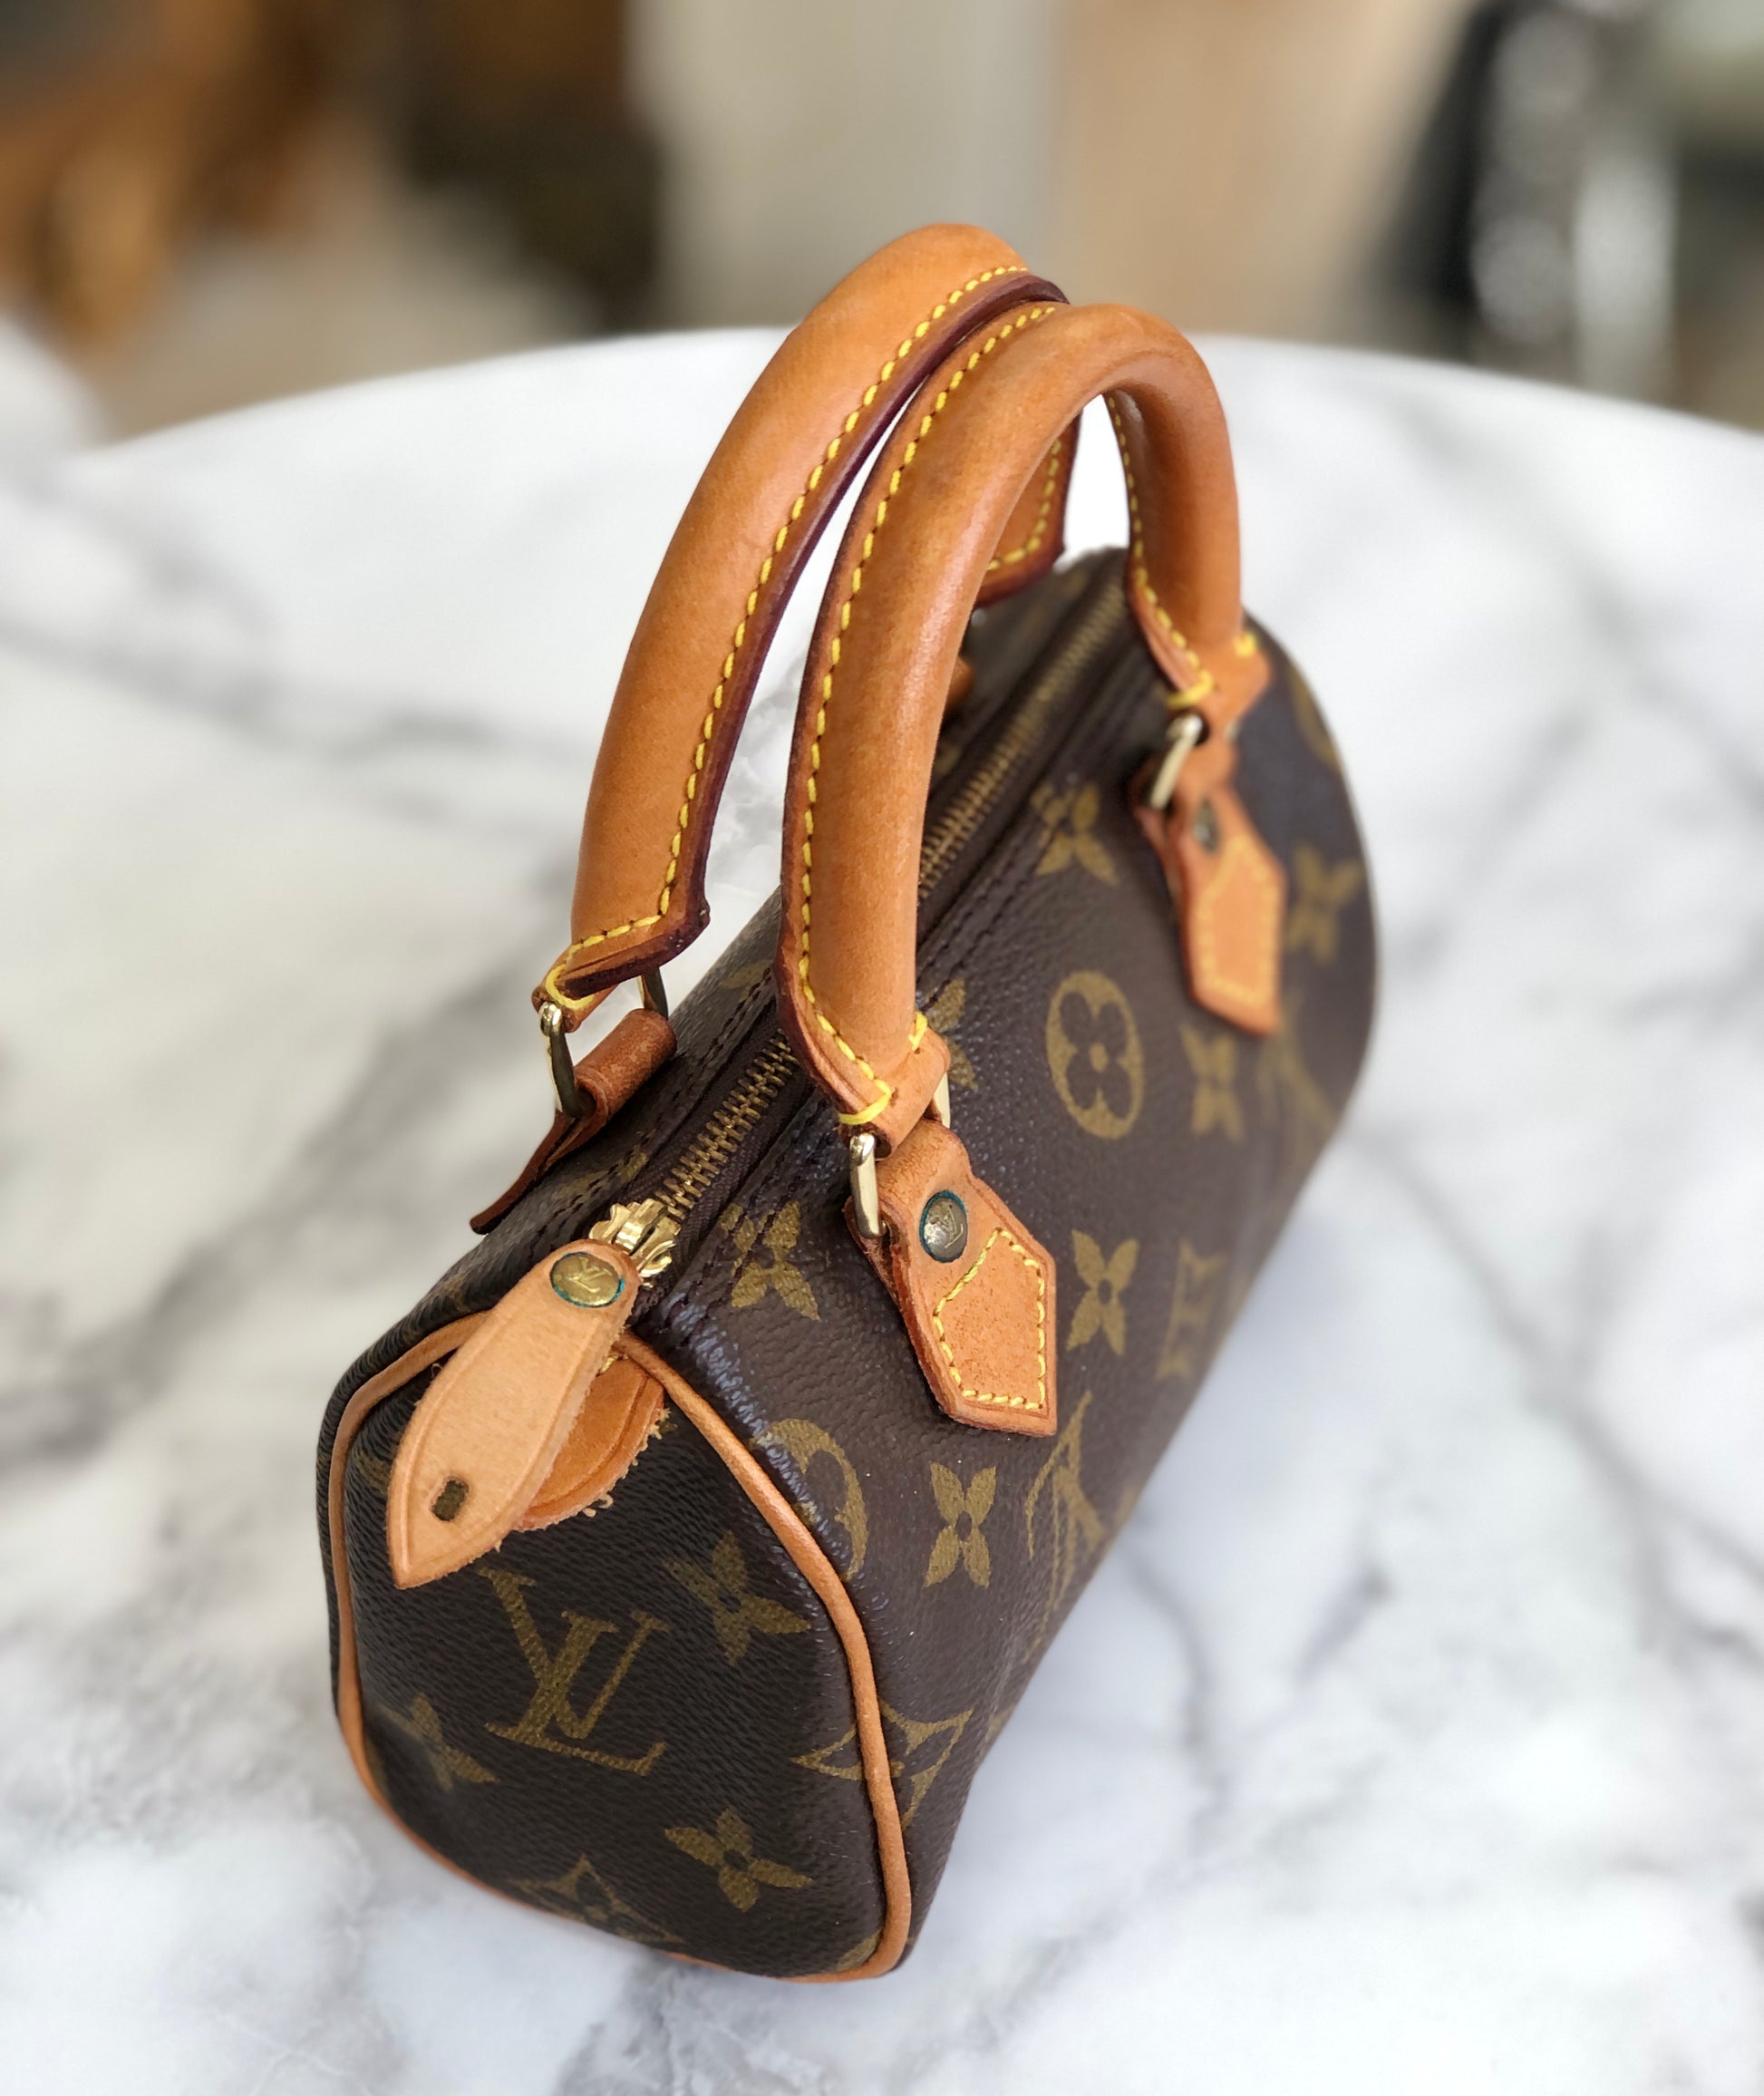 LOUIS VUITTON M41534 Mini Speedy With Strap Shoulder Bag Used